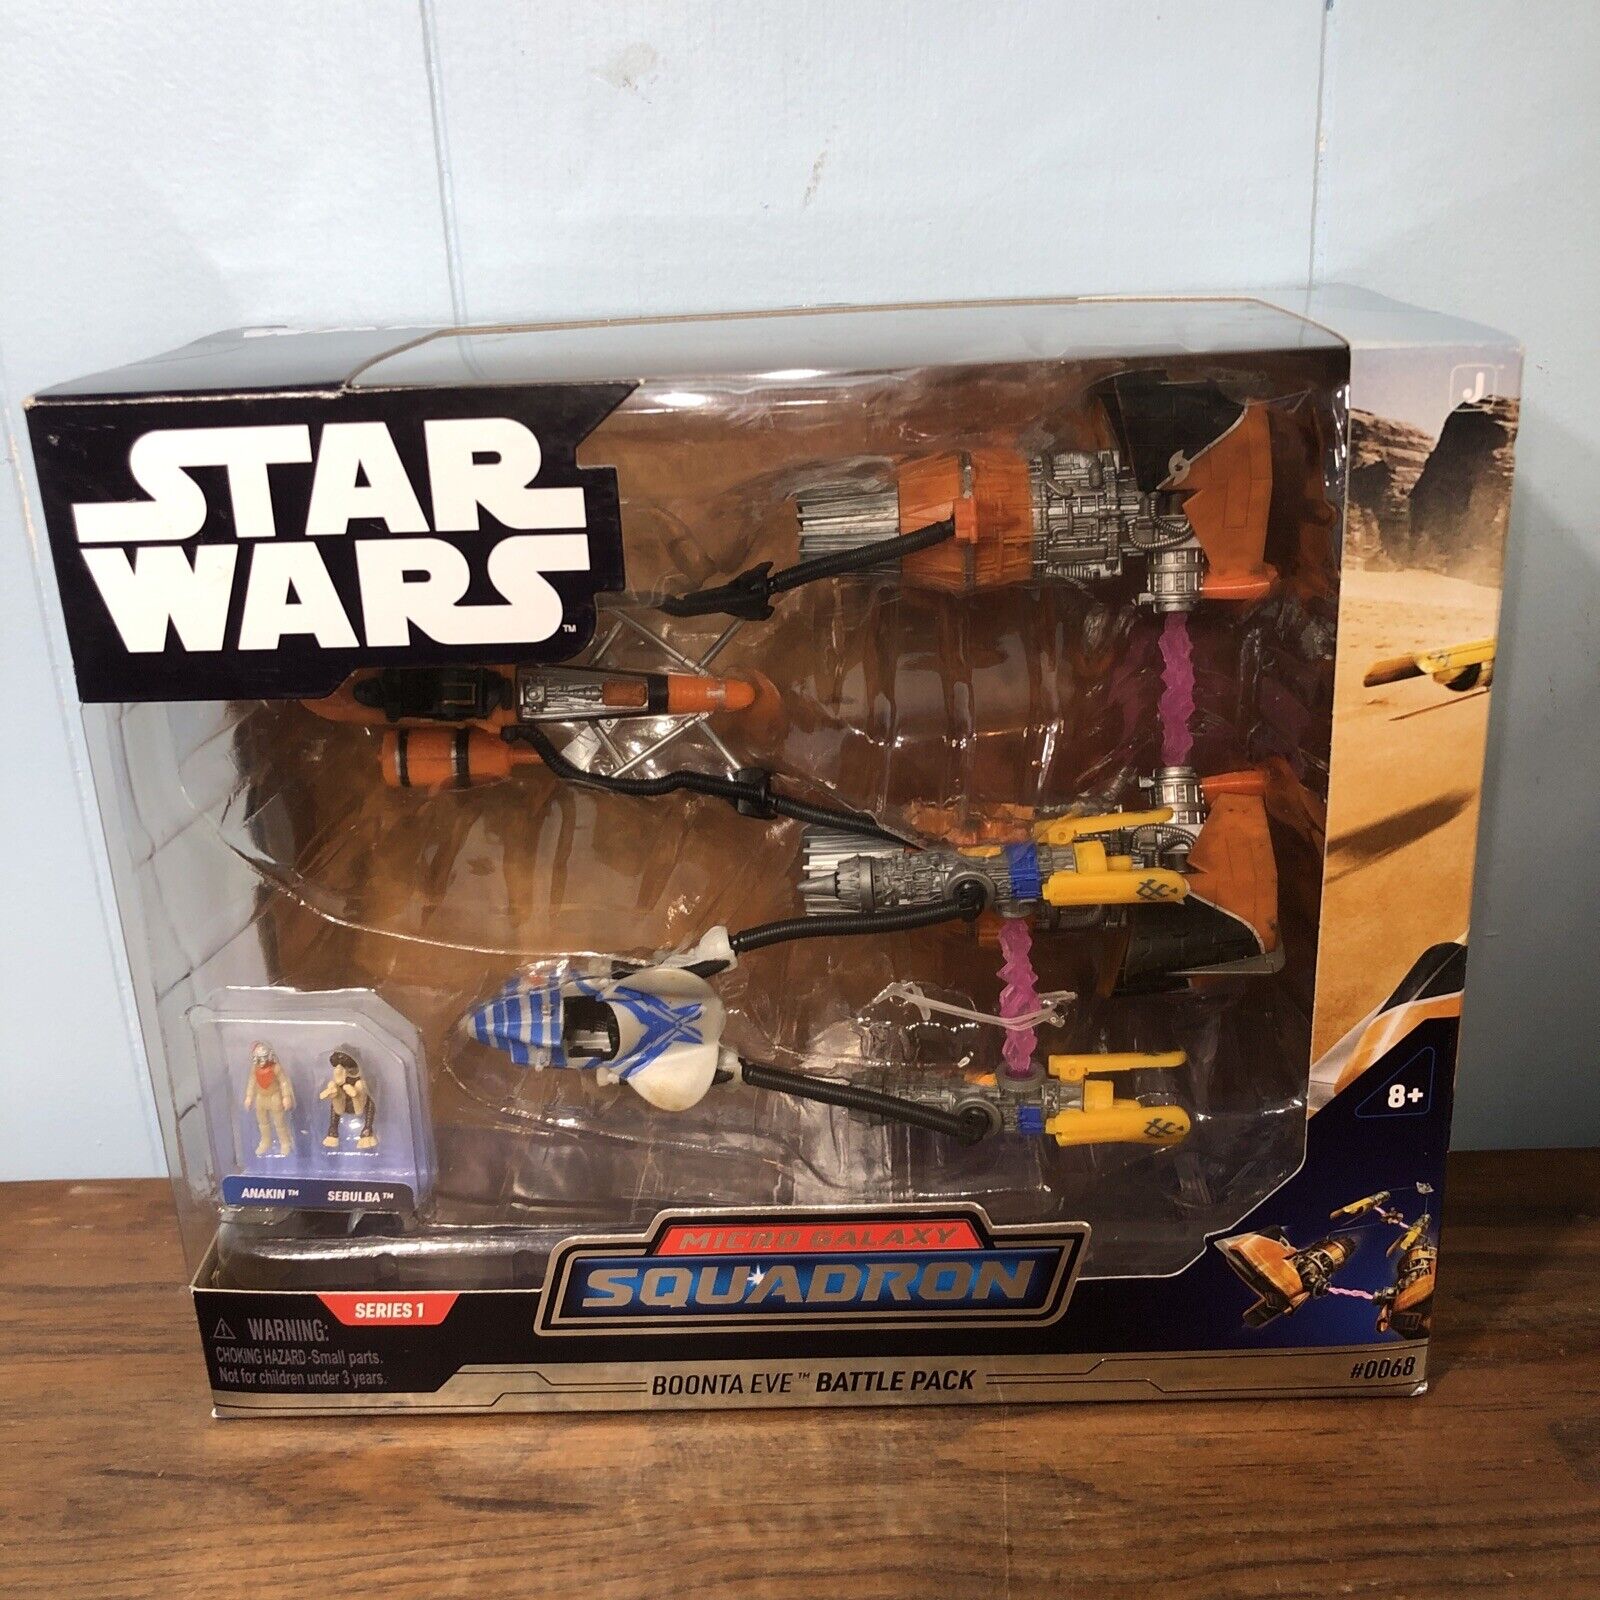 🚀Star Wars Micro Galaxy Squadron Battle at Boonta Eve Battle Pack NEW🚀